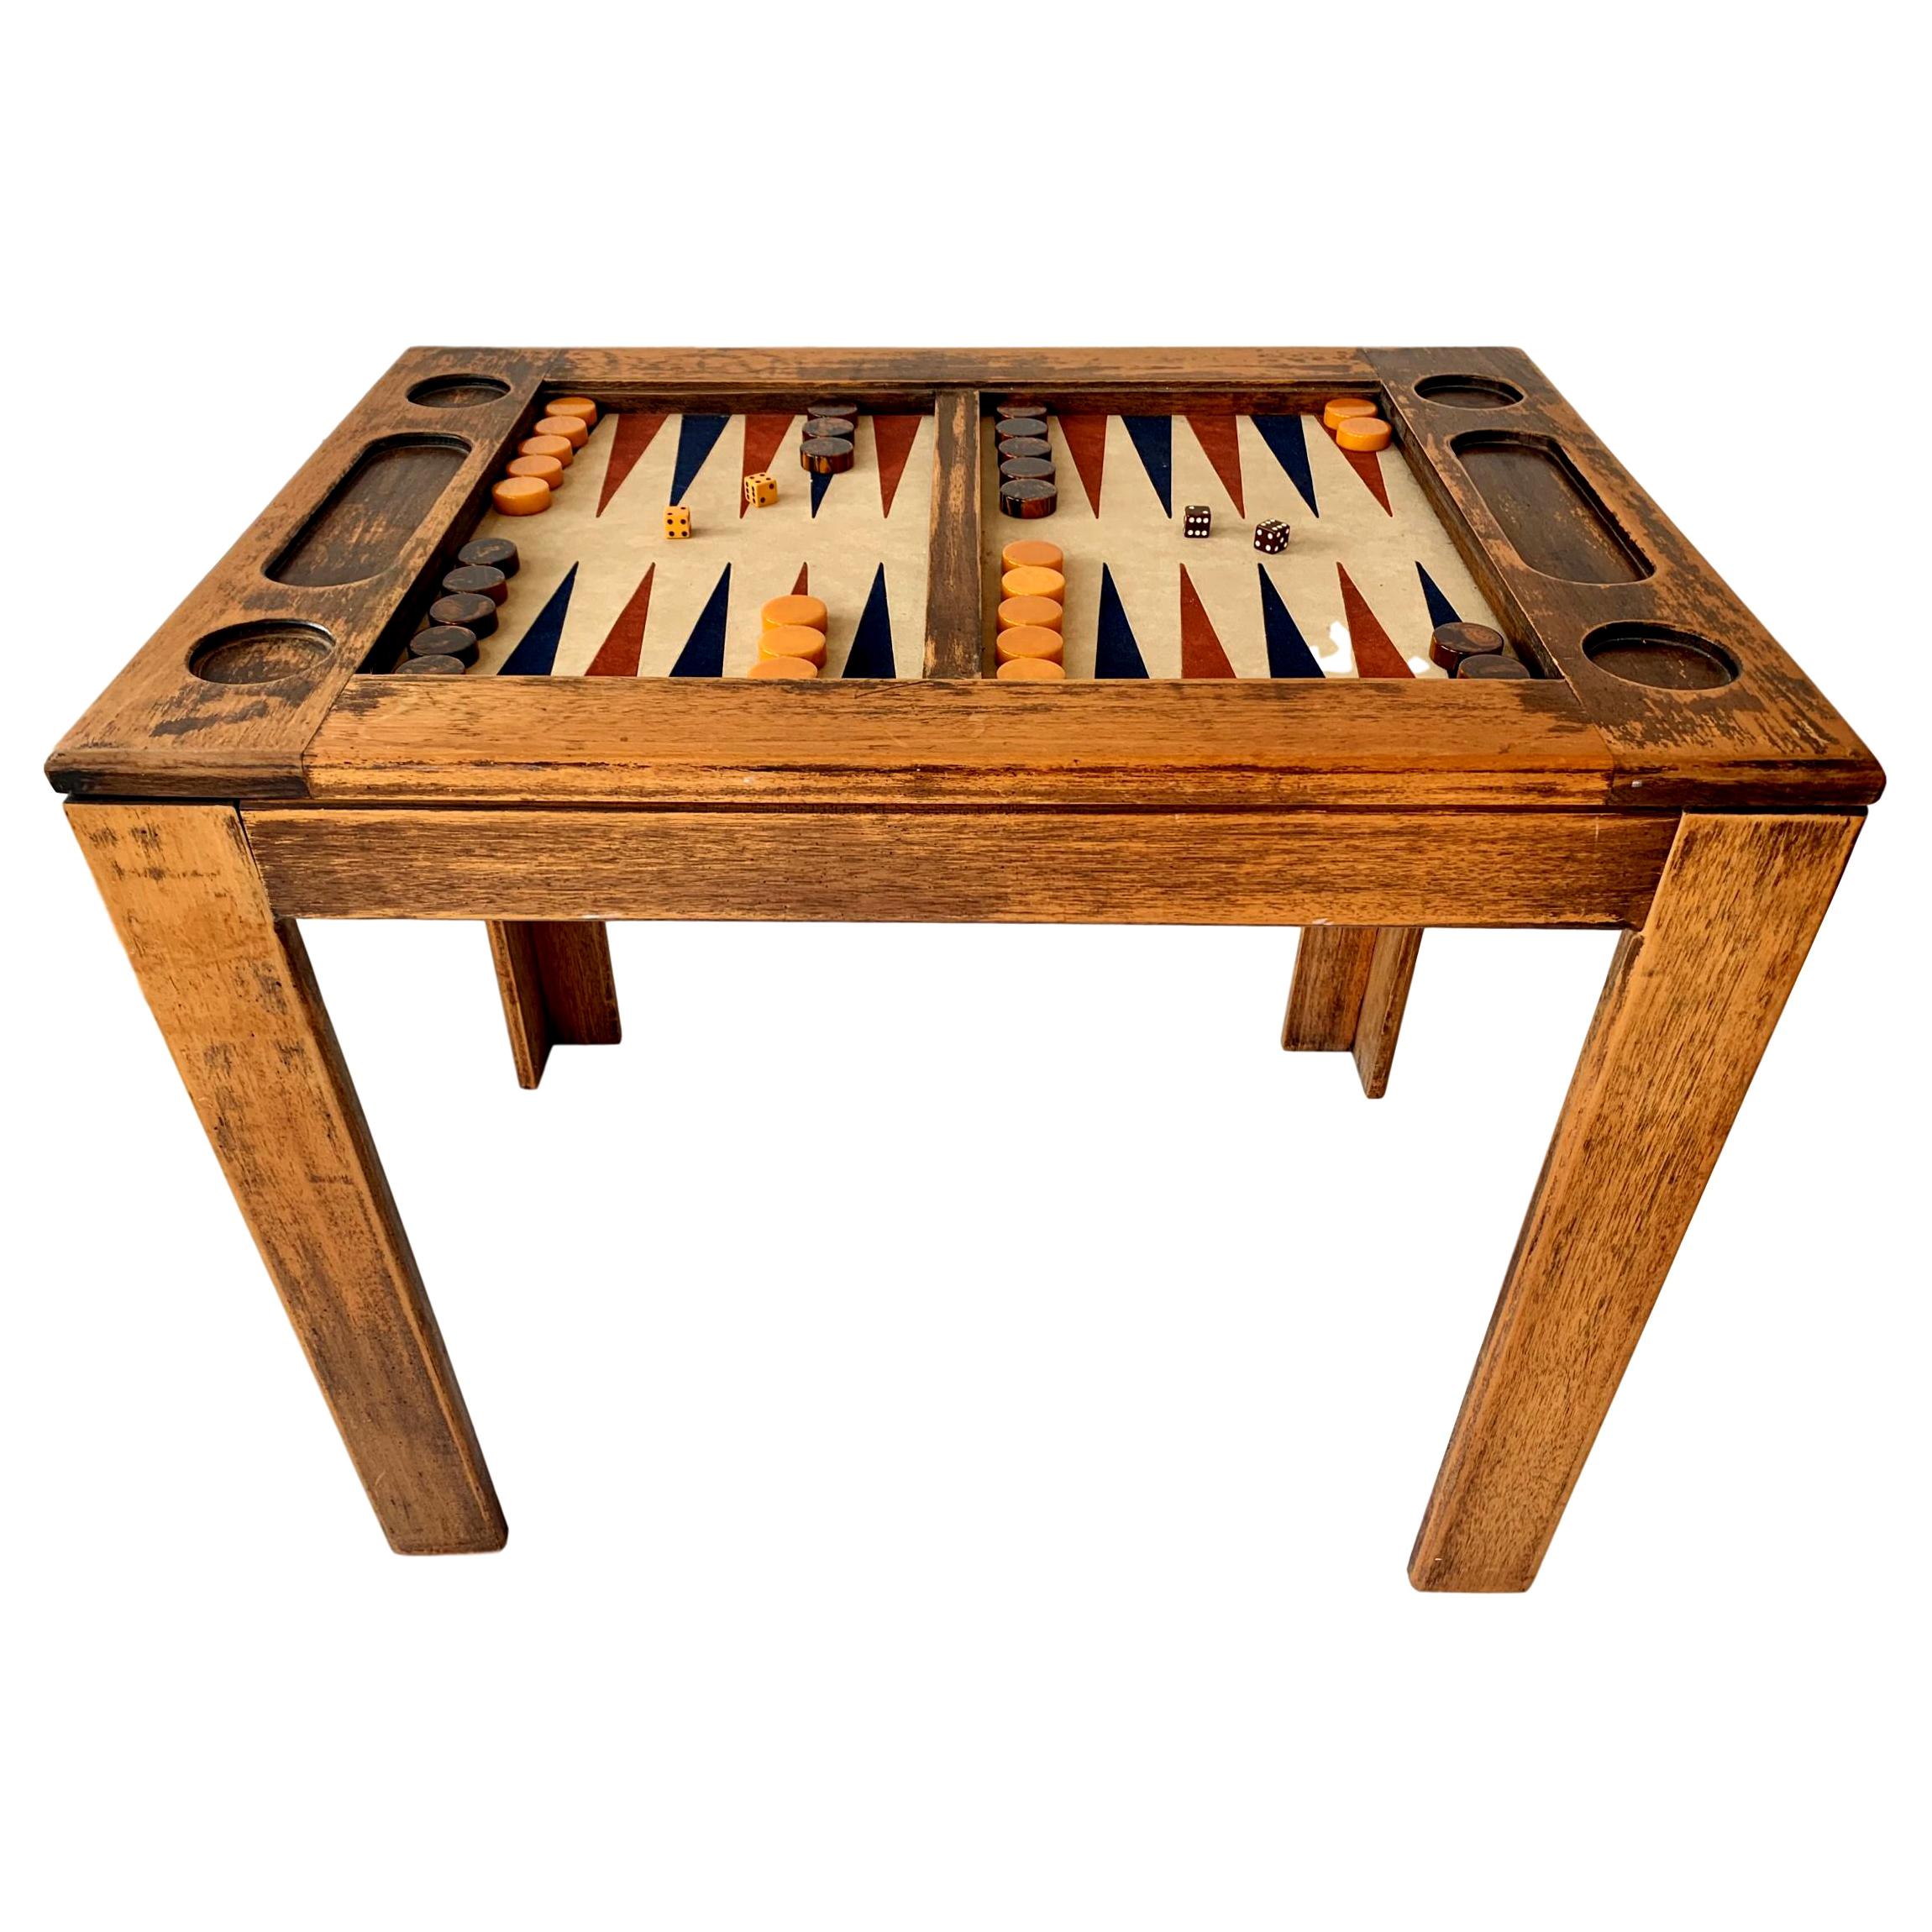 Rustic Oak and Suede Backgammon Table